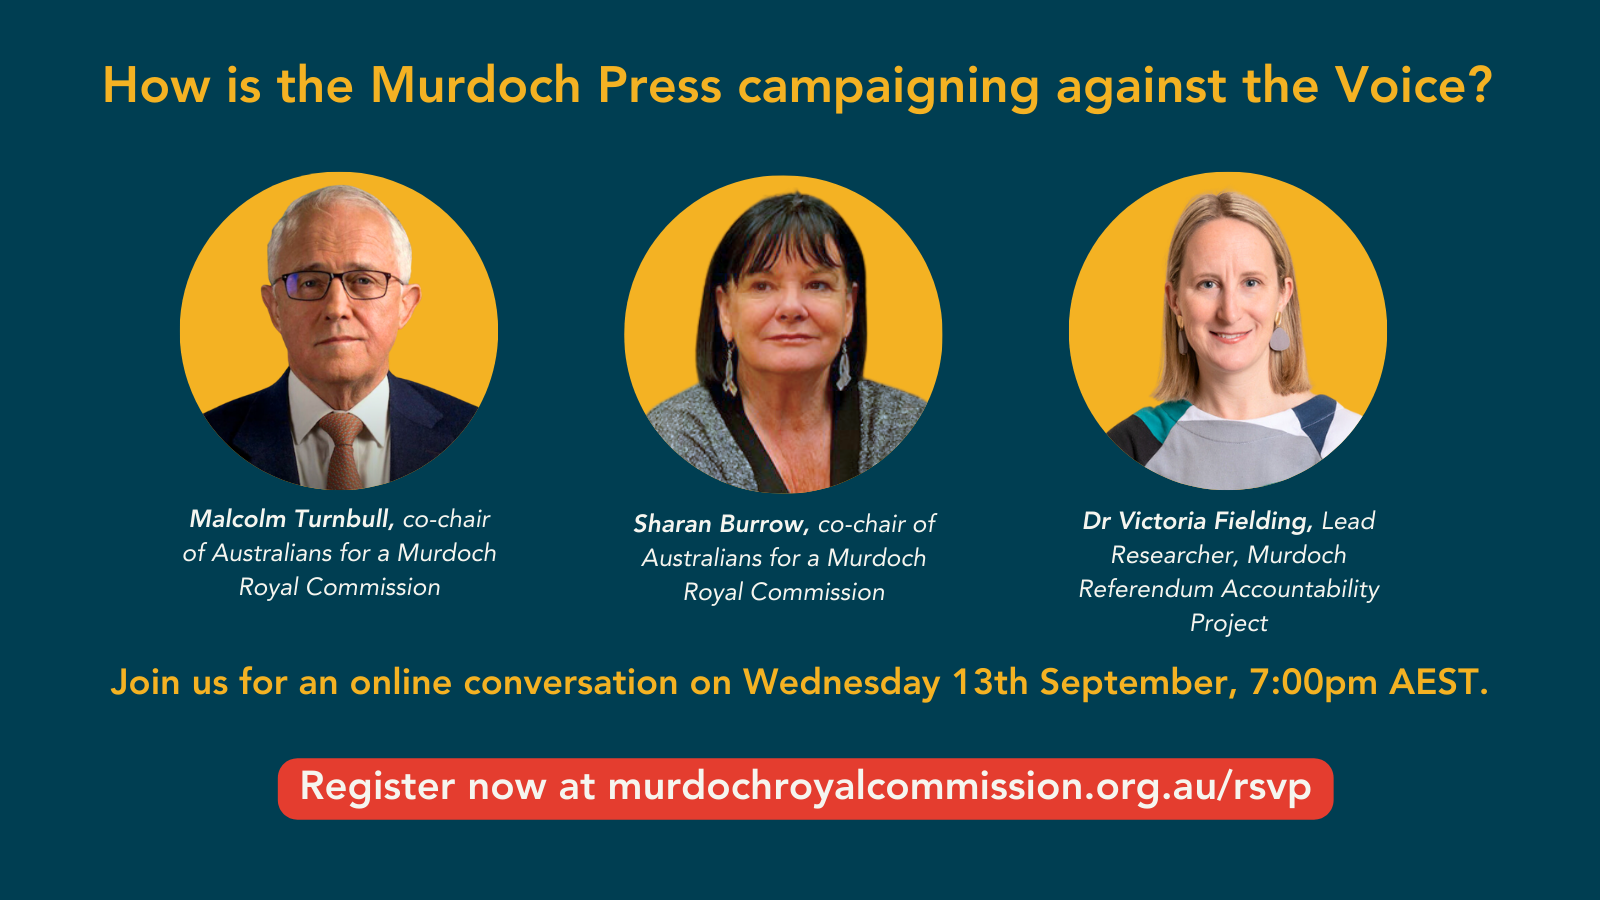 Headshots of Malcolm Turnbull, Sharan Burrow, and Dr Victoria Fielding with text "How is the Murdoch Press campaigning against the Voice? Join us for an online conversation on Wednesday September 13 at 7:00pm AEST. Register now at murdochroyalcommission.org.au/rsvp"